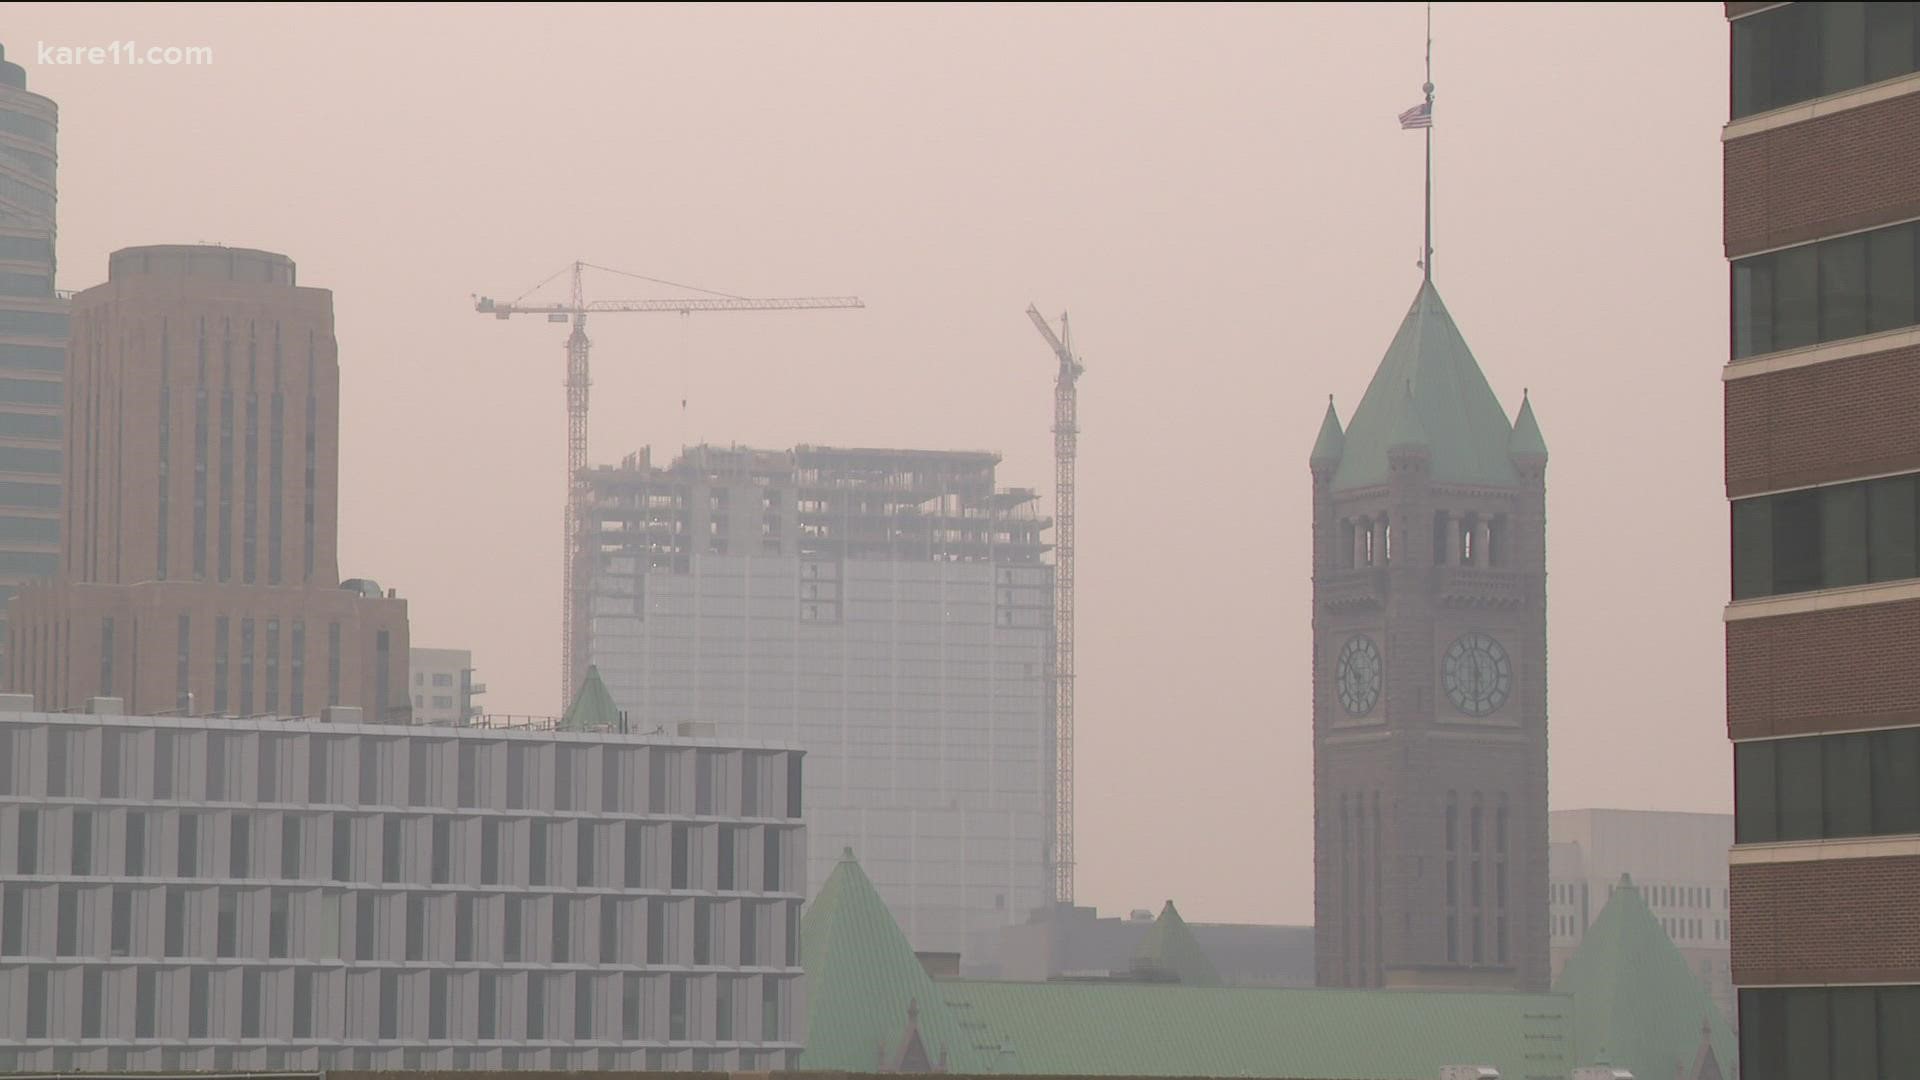 Smoke from Canadian wildfires has impacted Minnesota's air quality in a serious way. Here's what you need to know about what's driving the trends